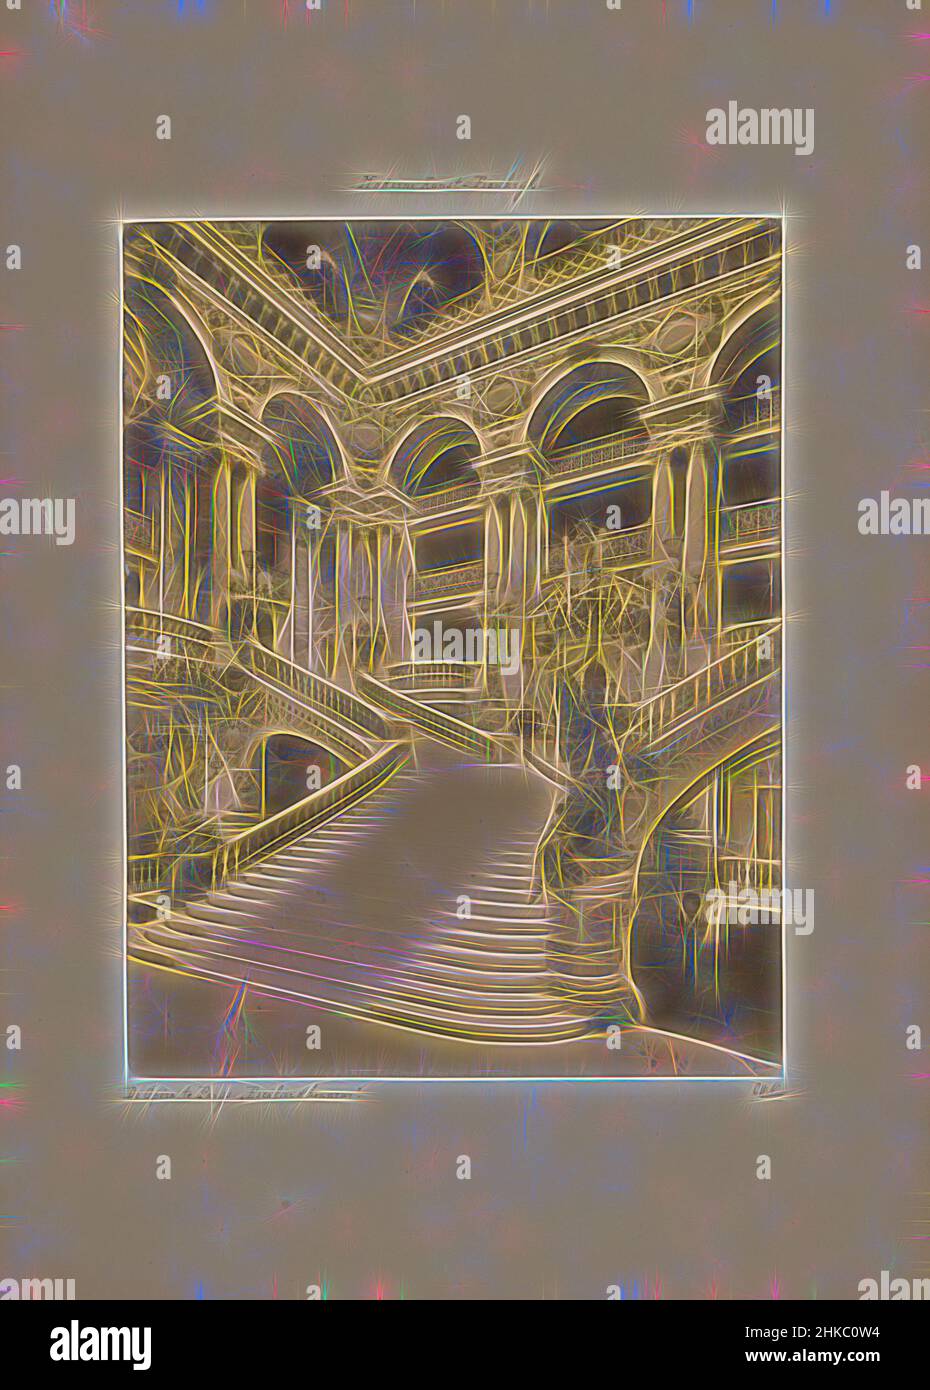 Inspired by Staircase in the Opéra Garnier in Paris, PARIS. Le Grand Escalier de l'Opéra., X phot., Opéra de Paris, c. 1875 - c. 1900, albumen print, height 272 mm × width 208 mm, Reimagined by Artotop. Classic art reinvented with a modern twist. Design of warm cheerful glowing of brightness and light ray radiance. Photography inspired by surrealism and futurism, embracing dynamic energy of modern technology, movement, speed and revolutionize culture Stock Photo